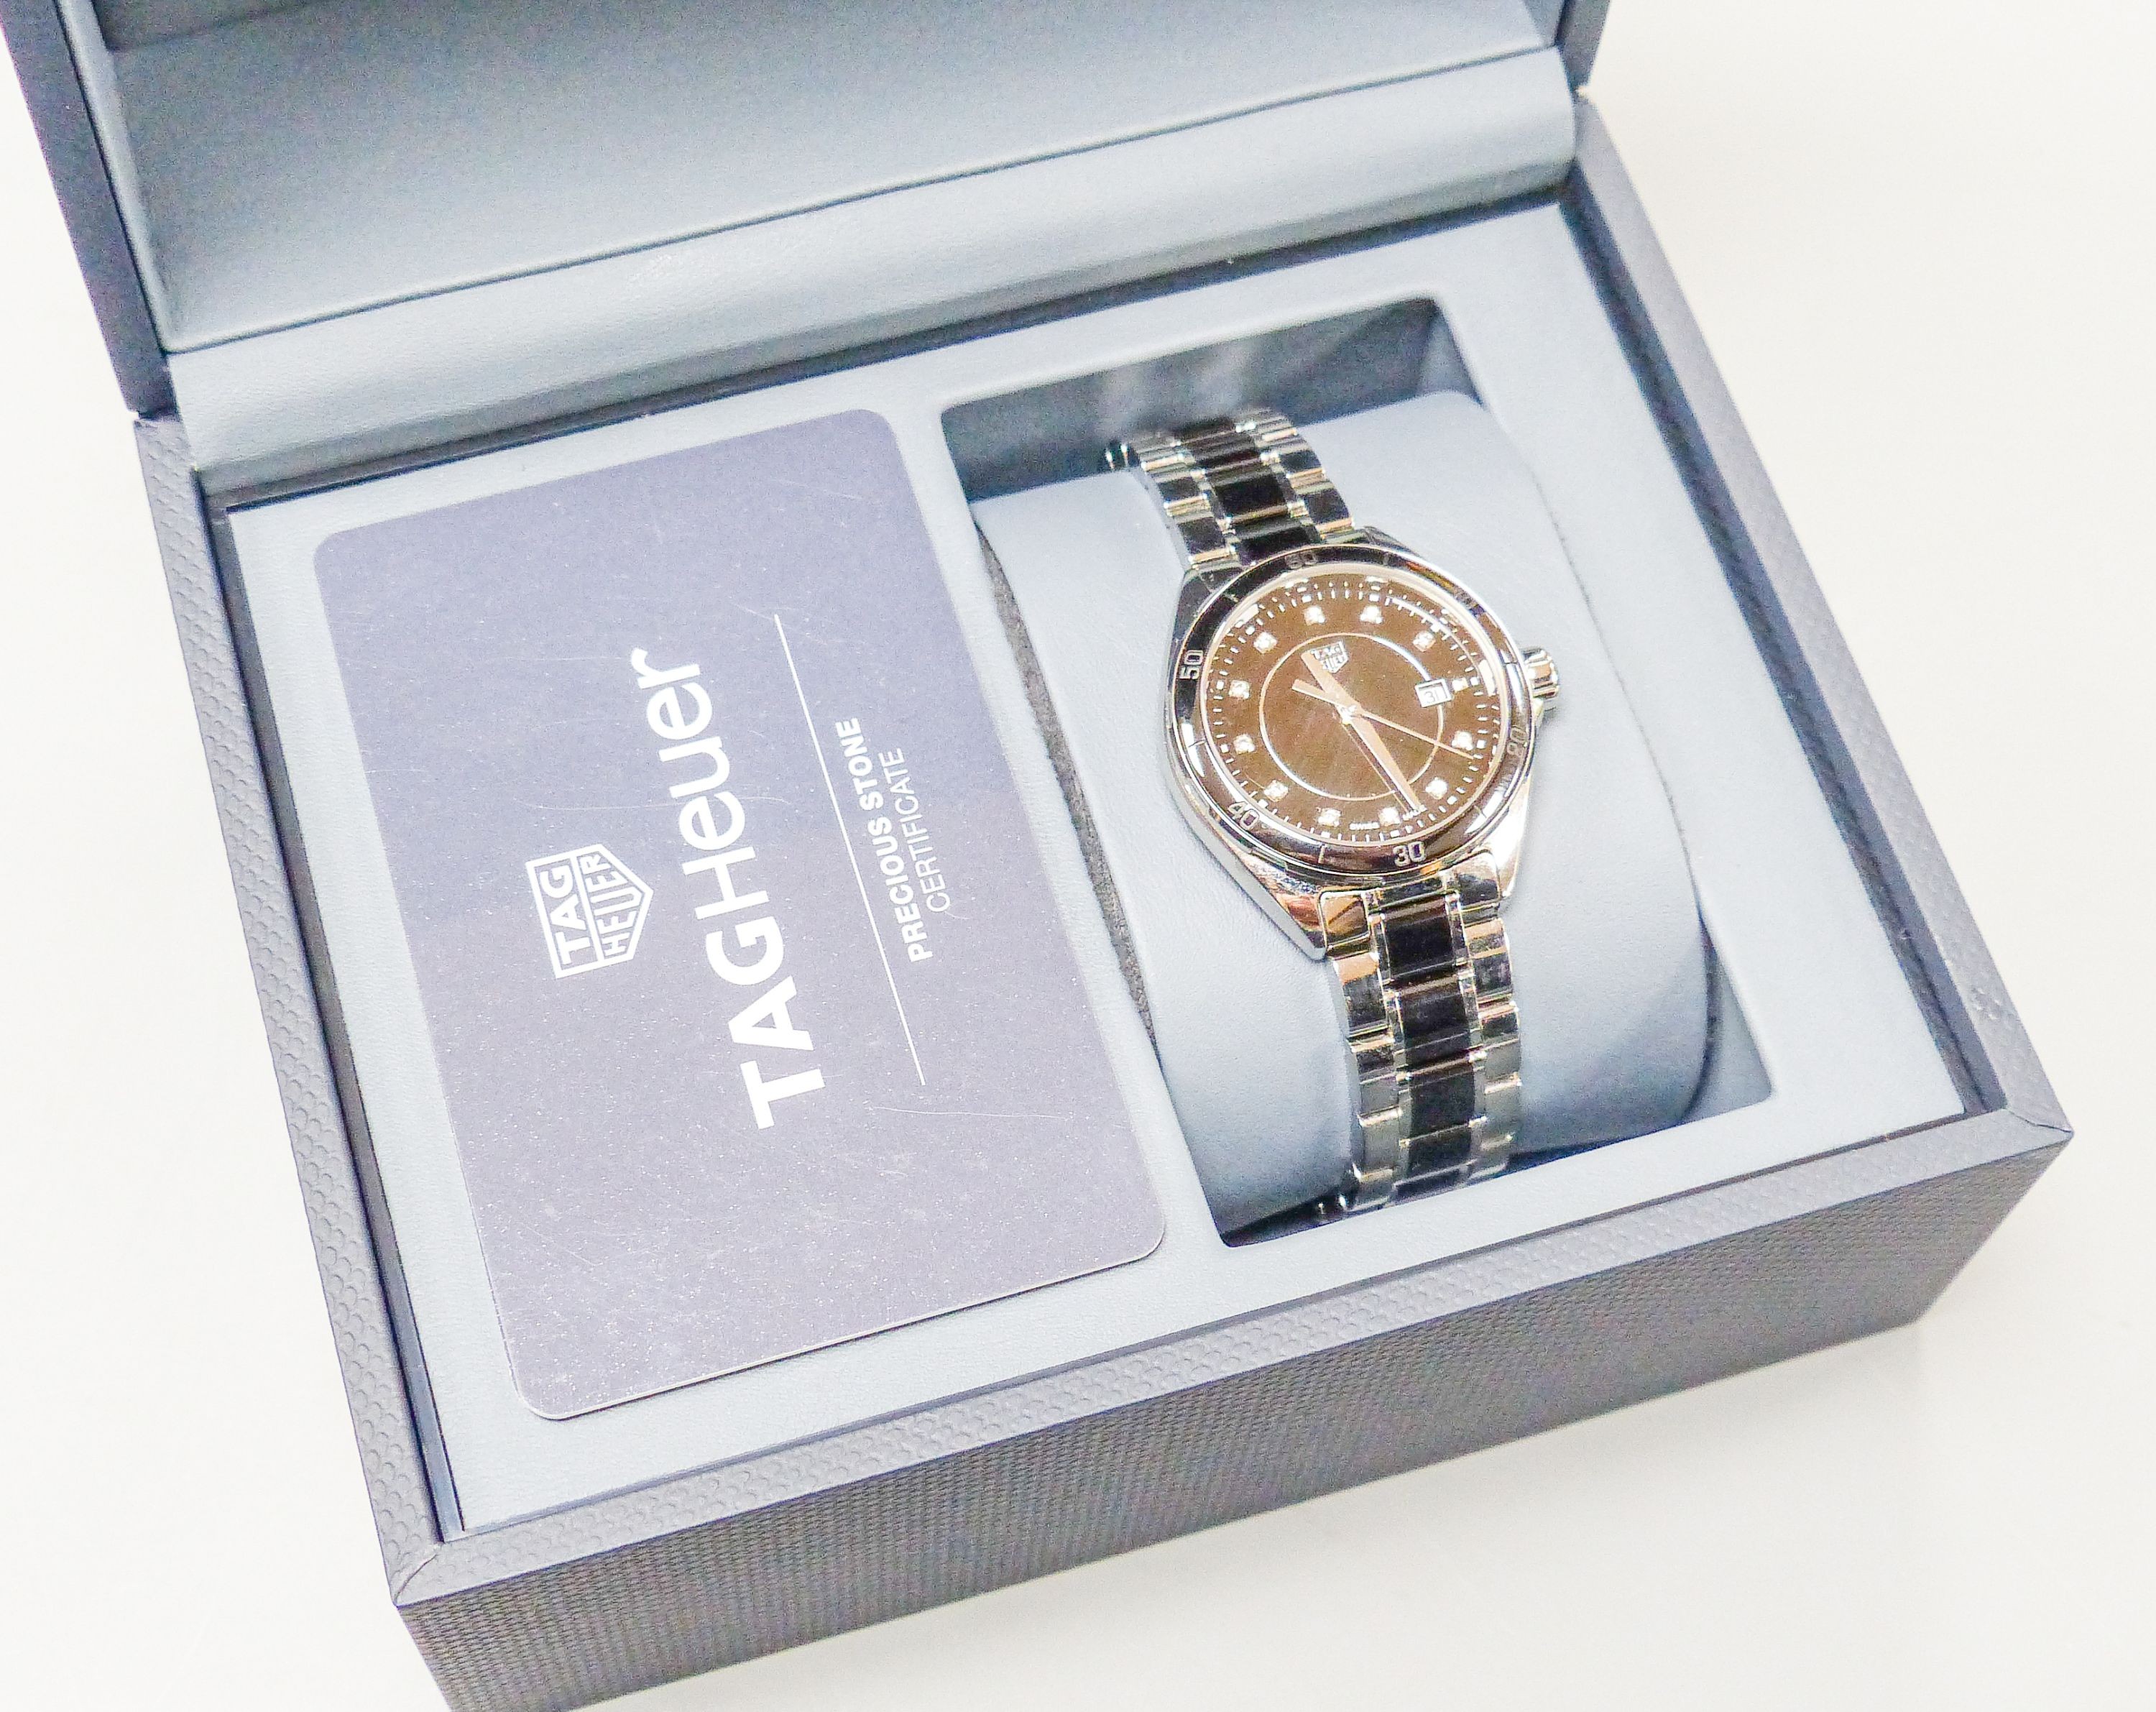 A modern stainless steel Tag Heuer quartz wrist watch with diamond dot numerals, case diameter 32mm, with box.